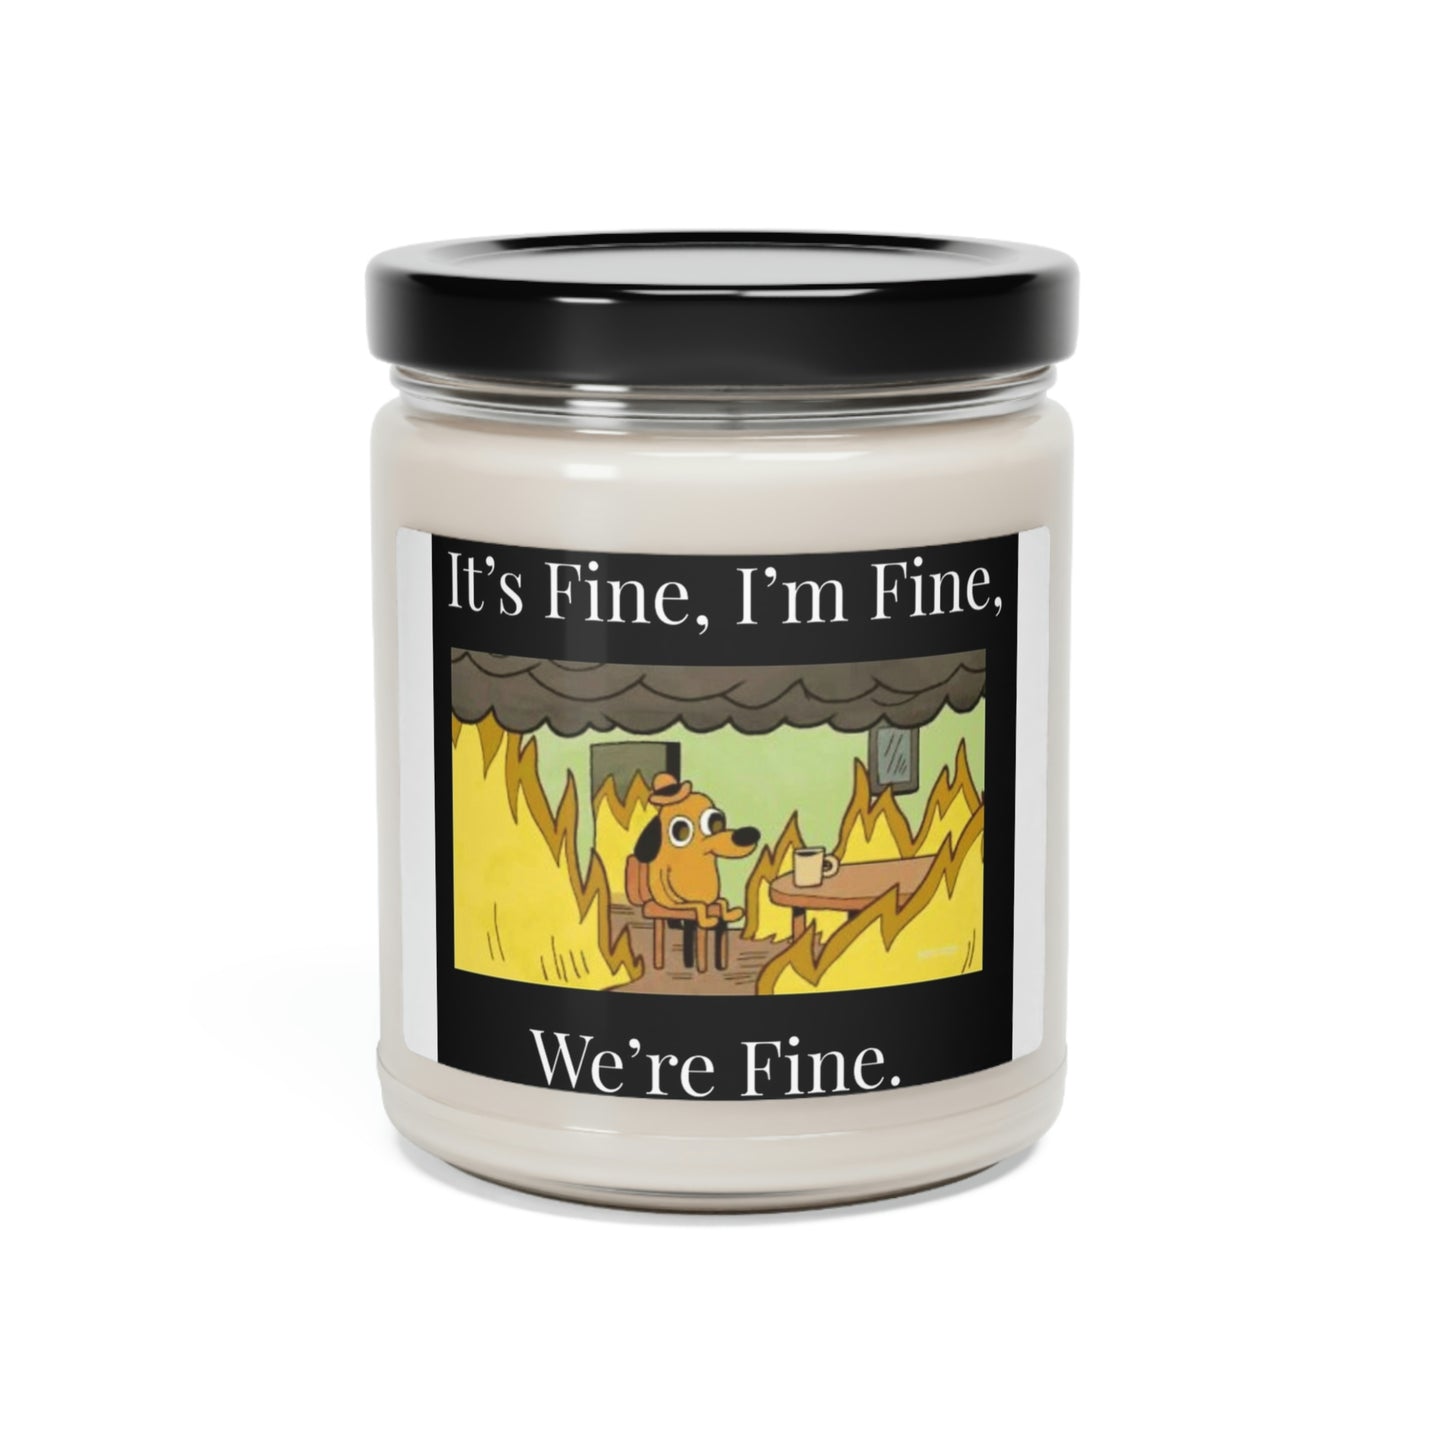 We're Fine Scented Soy Candle